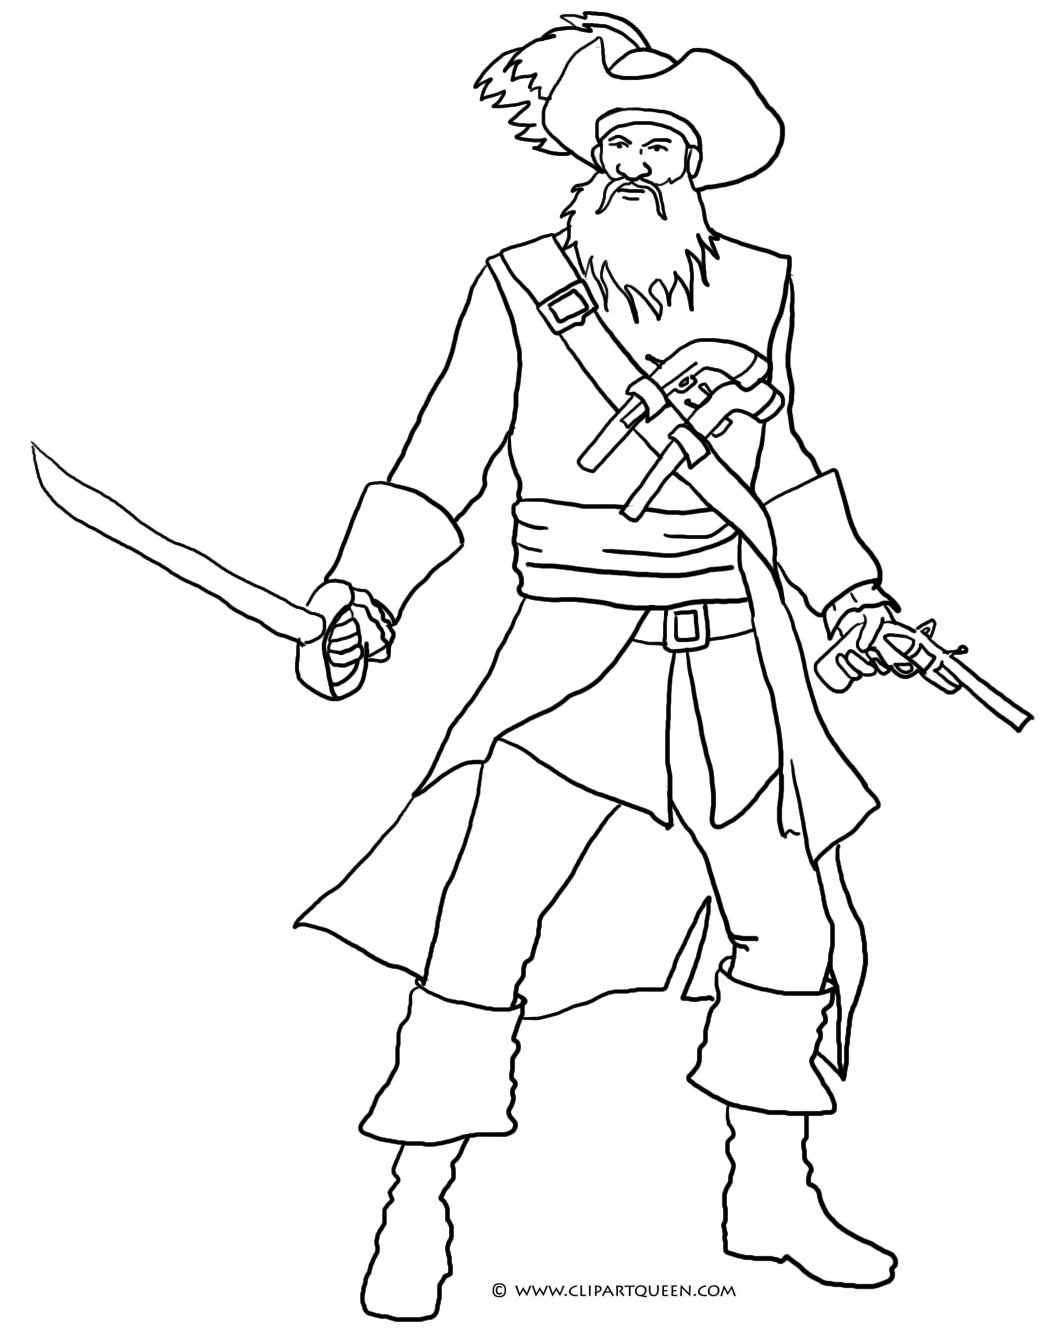 pirate-coloring-pages